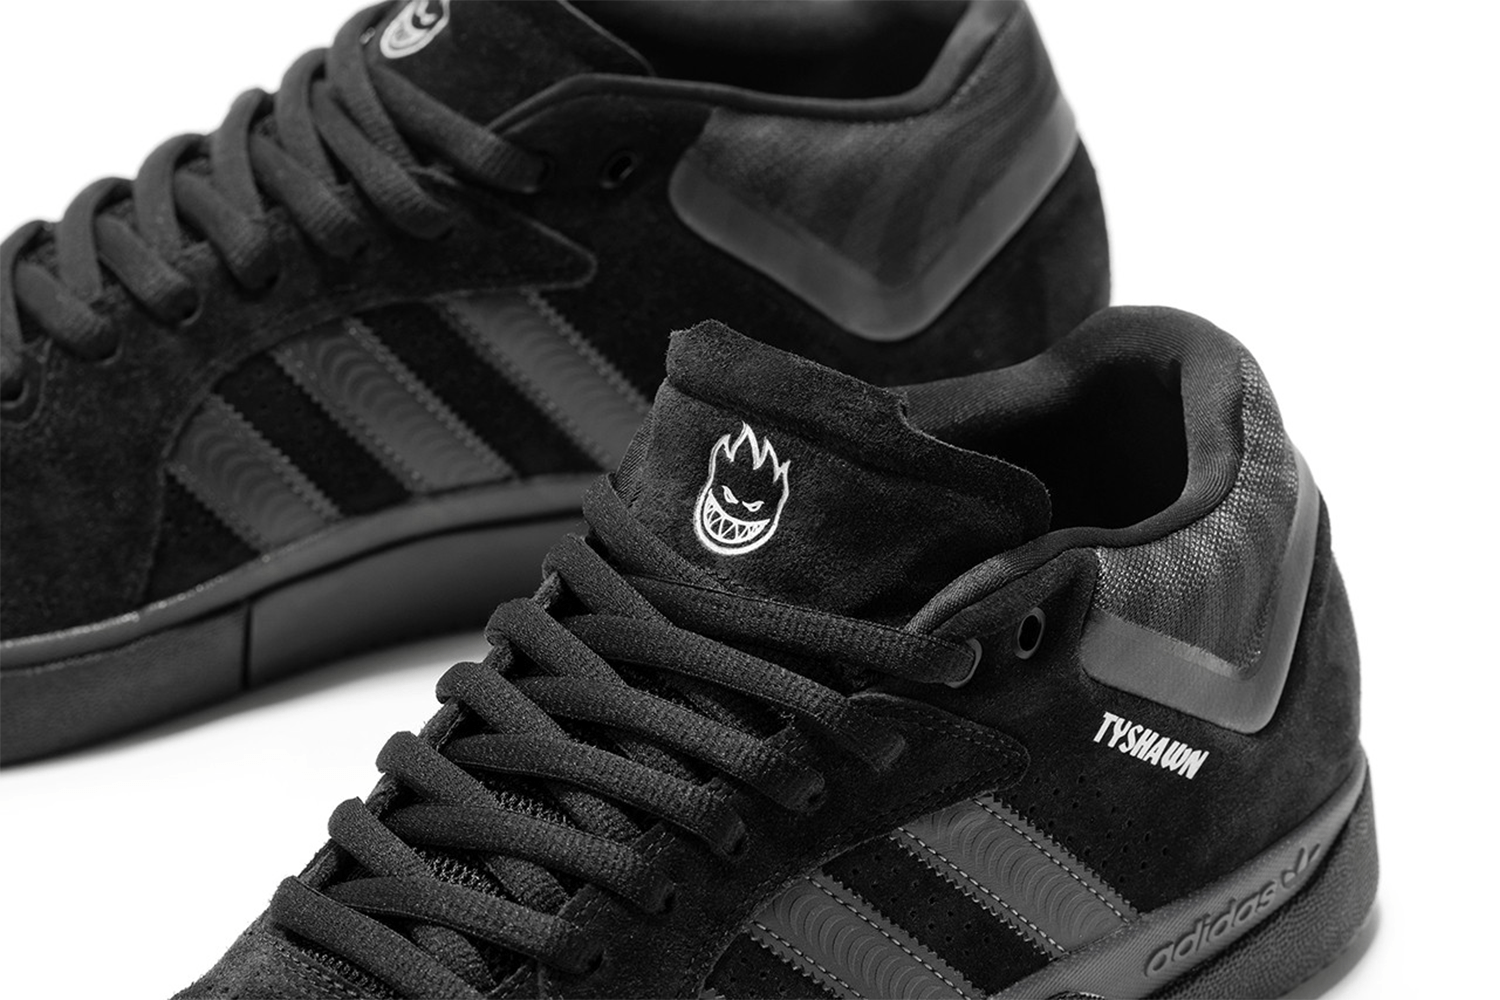 adidas and Spitfire collaborate on a new Tyshawn Jones signature shoe